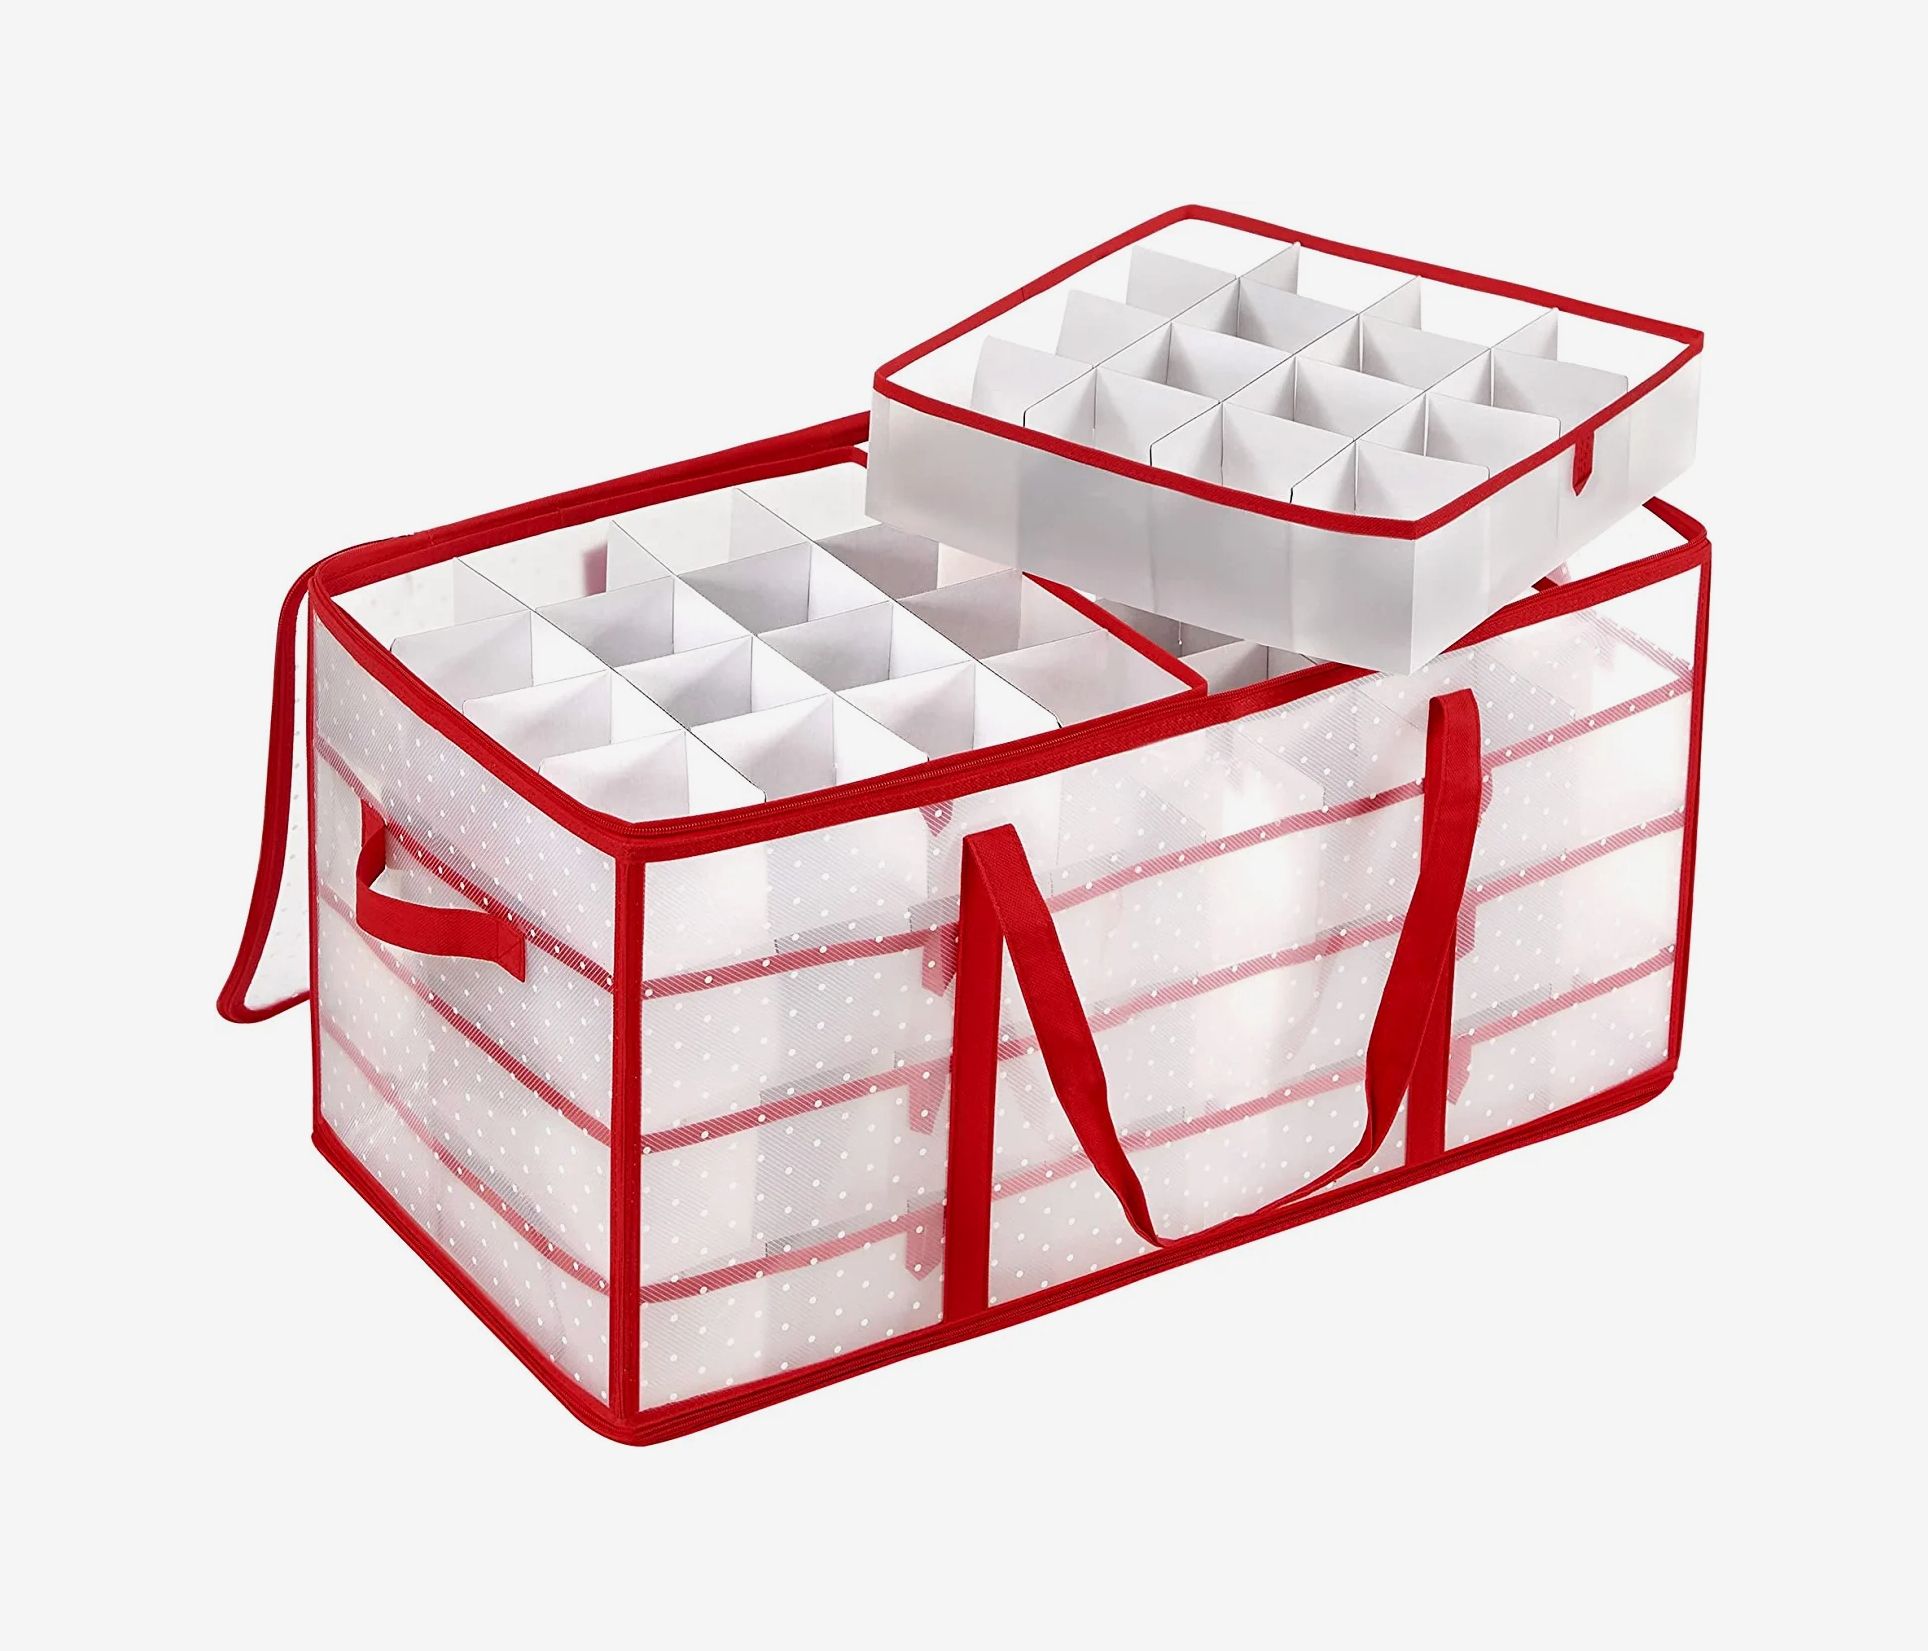 Large Target Storage Bins Just $7, Perfect for Storing Christmas Decor!